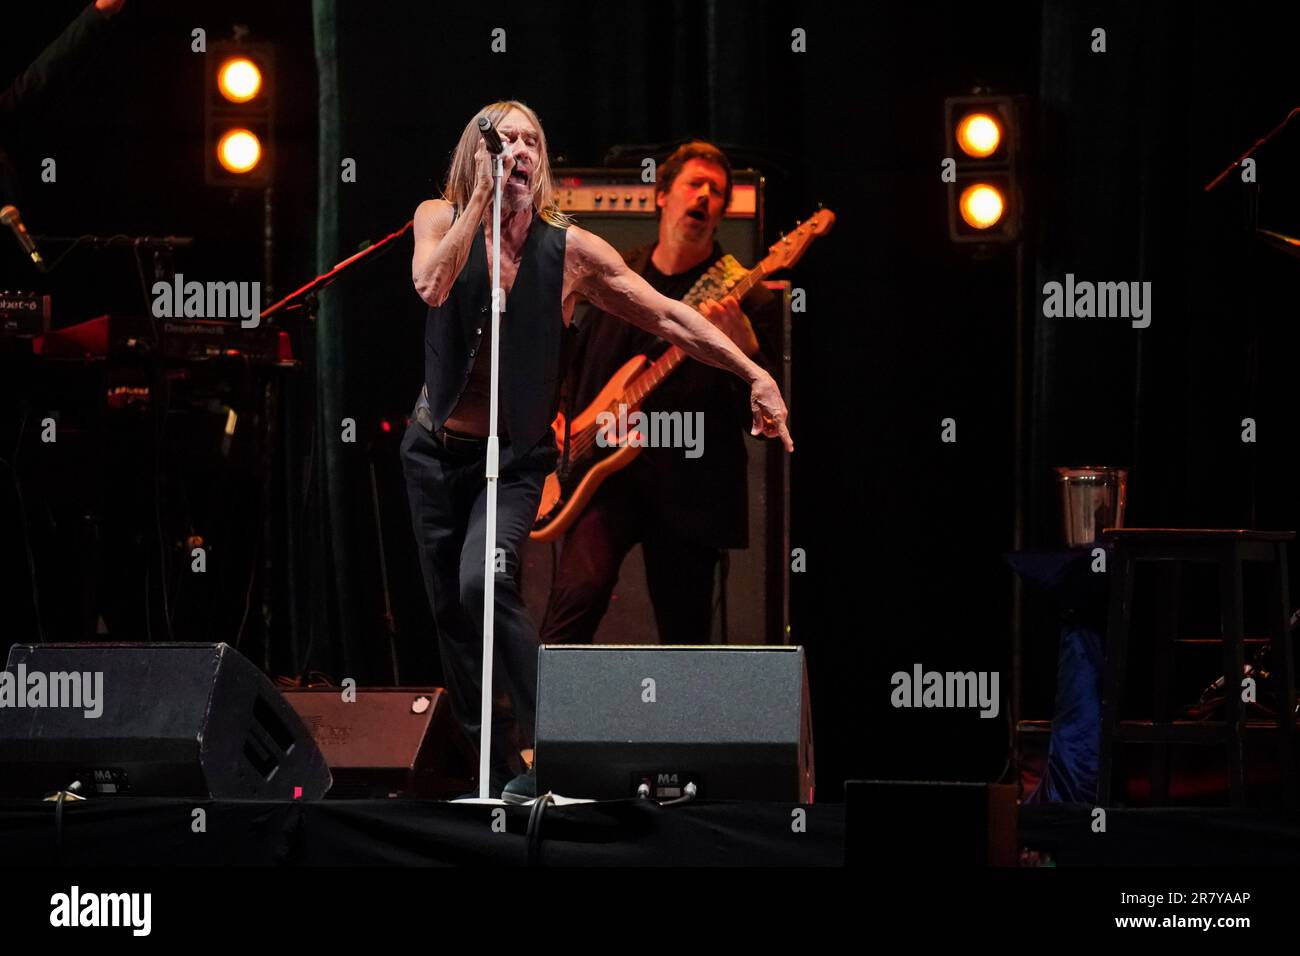 Iggy Pop during performance at the Azkena Rock Festival 2023, on June 16, 2023, in Alava, Basque Country (Spain). Iggy Pop was the singer and frontman of The Stooges,